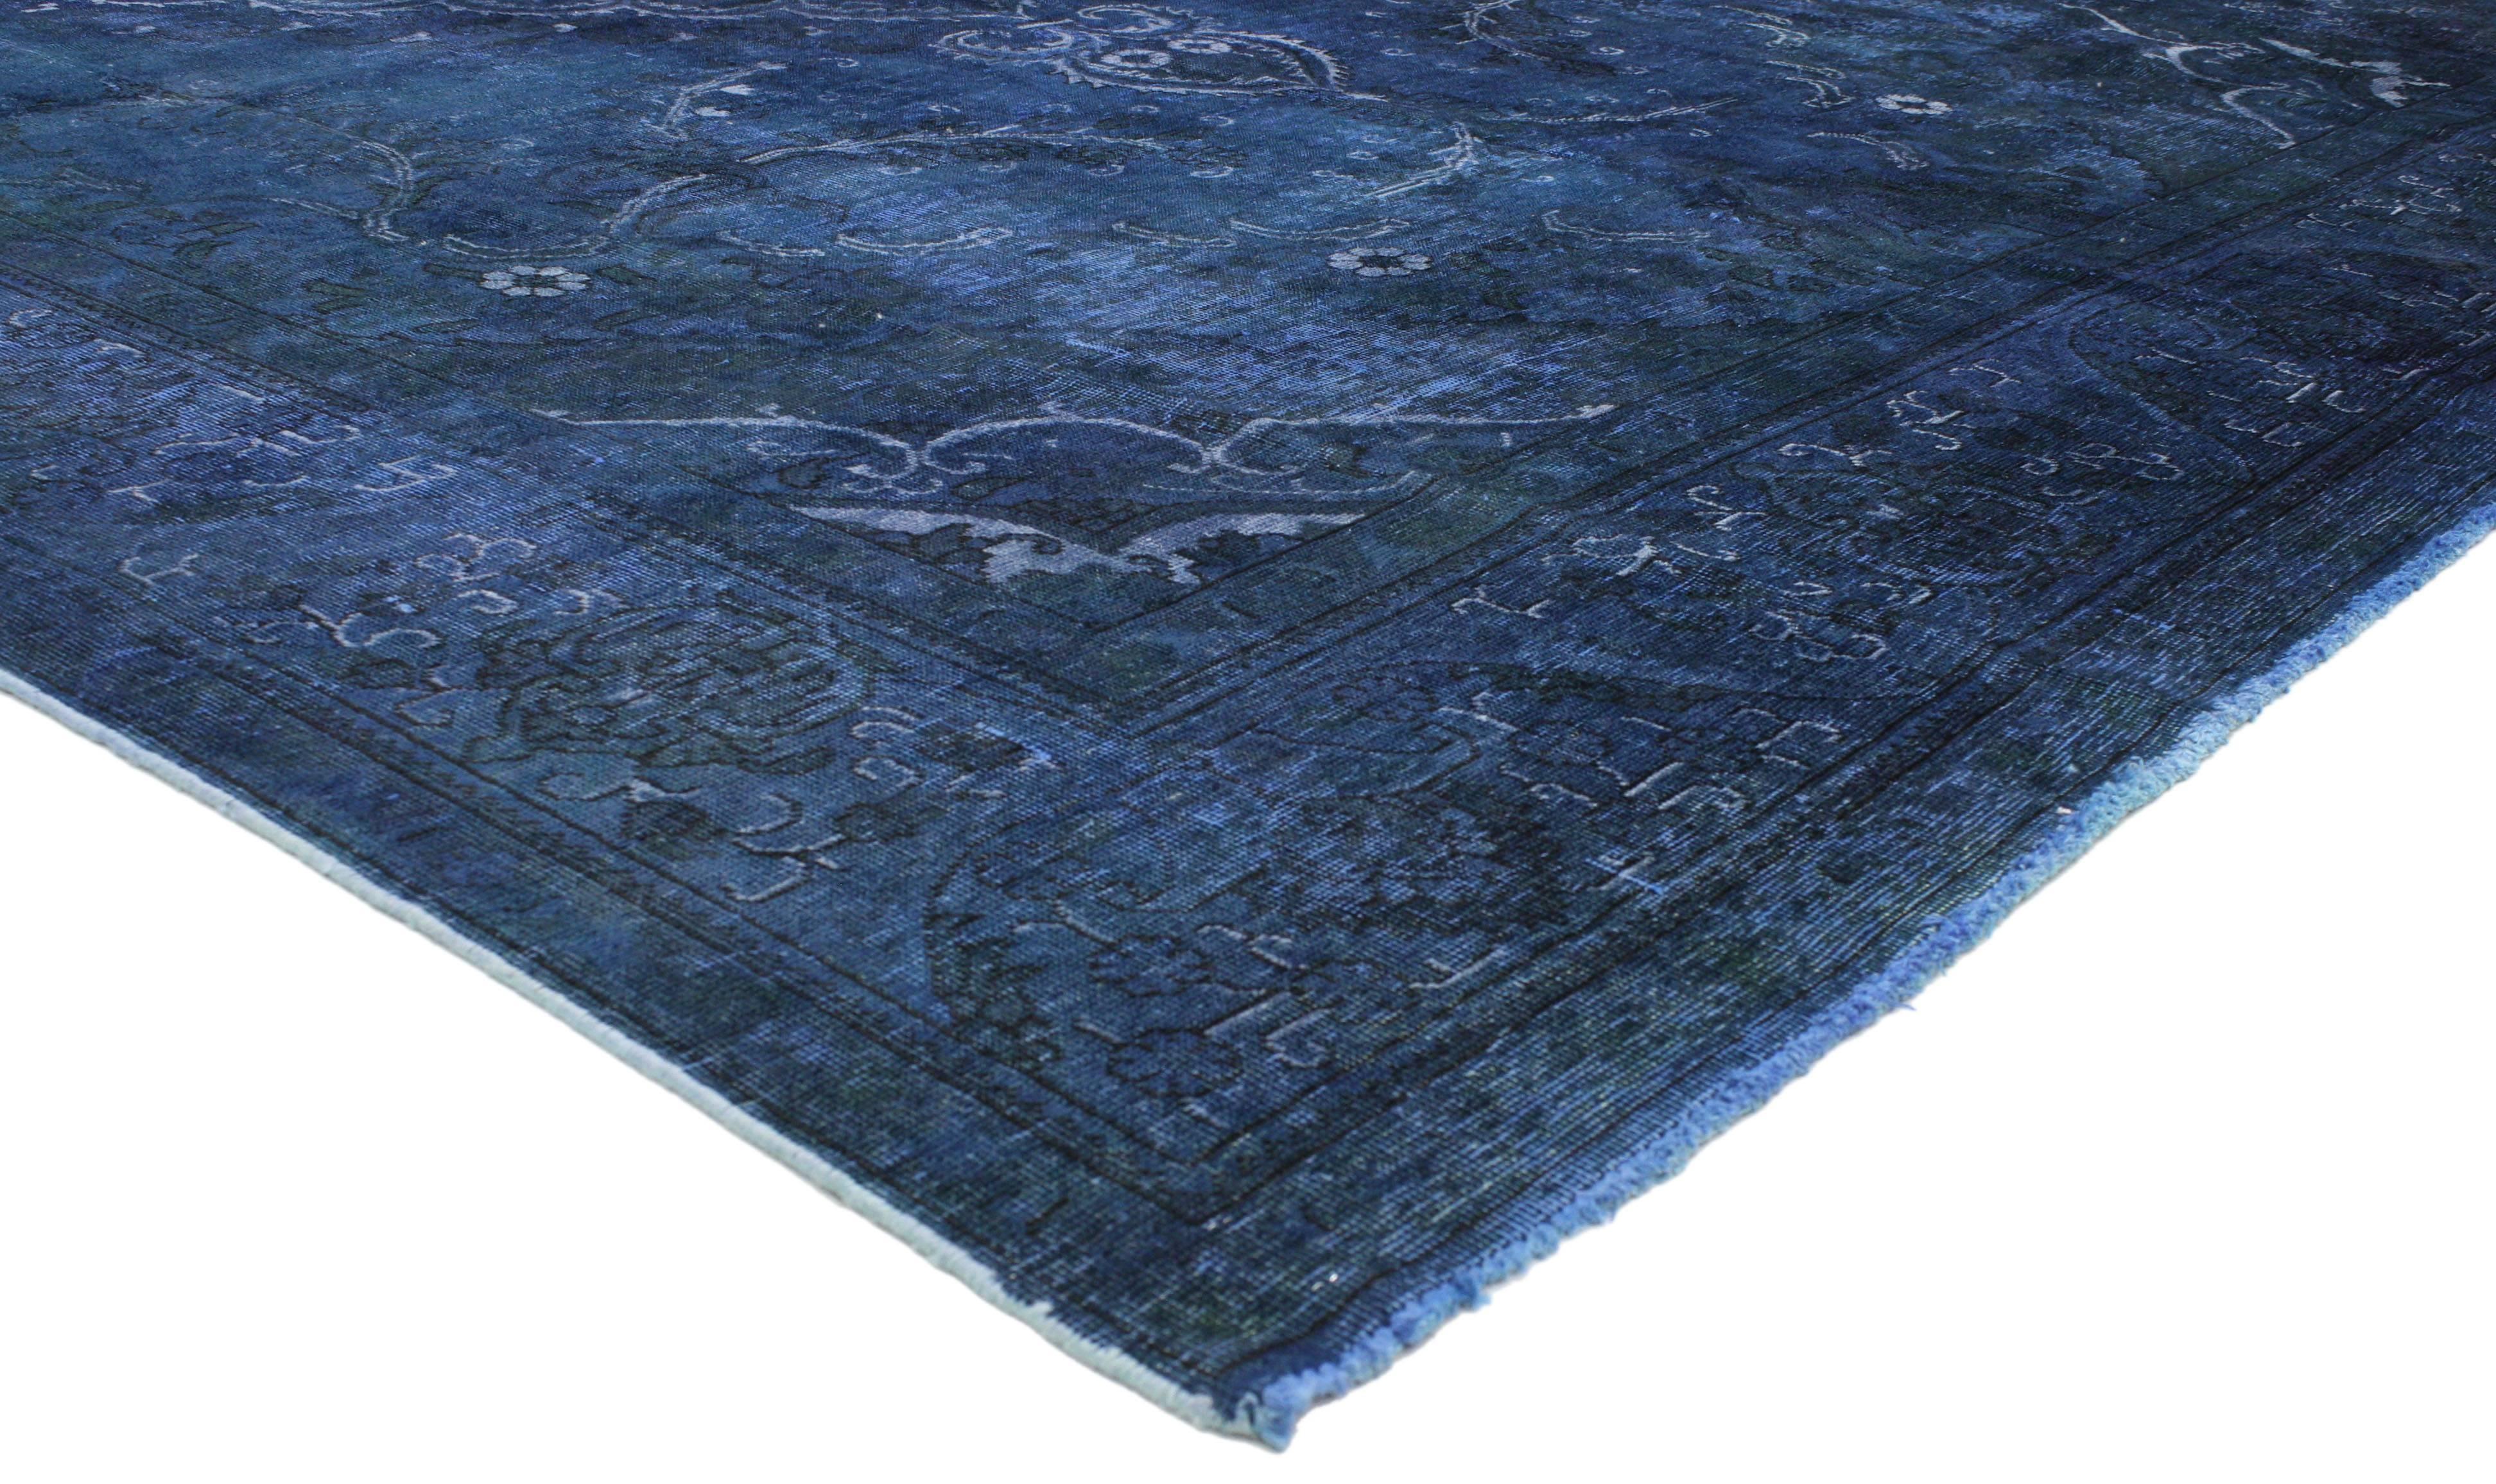 80410 Distressed Blue Overdyed Vintage Persian Rug, Blue Persian Gallery Rug. This beautifully composed overdyed blue vintage Persian gallery rug features an inconspicuous center medallion with two cartouche finials and complementary border